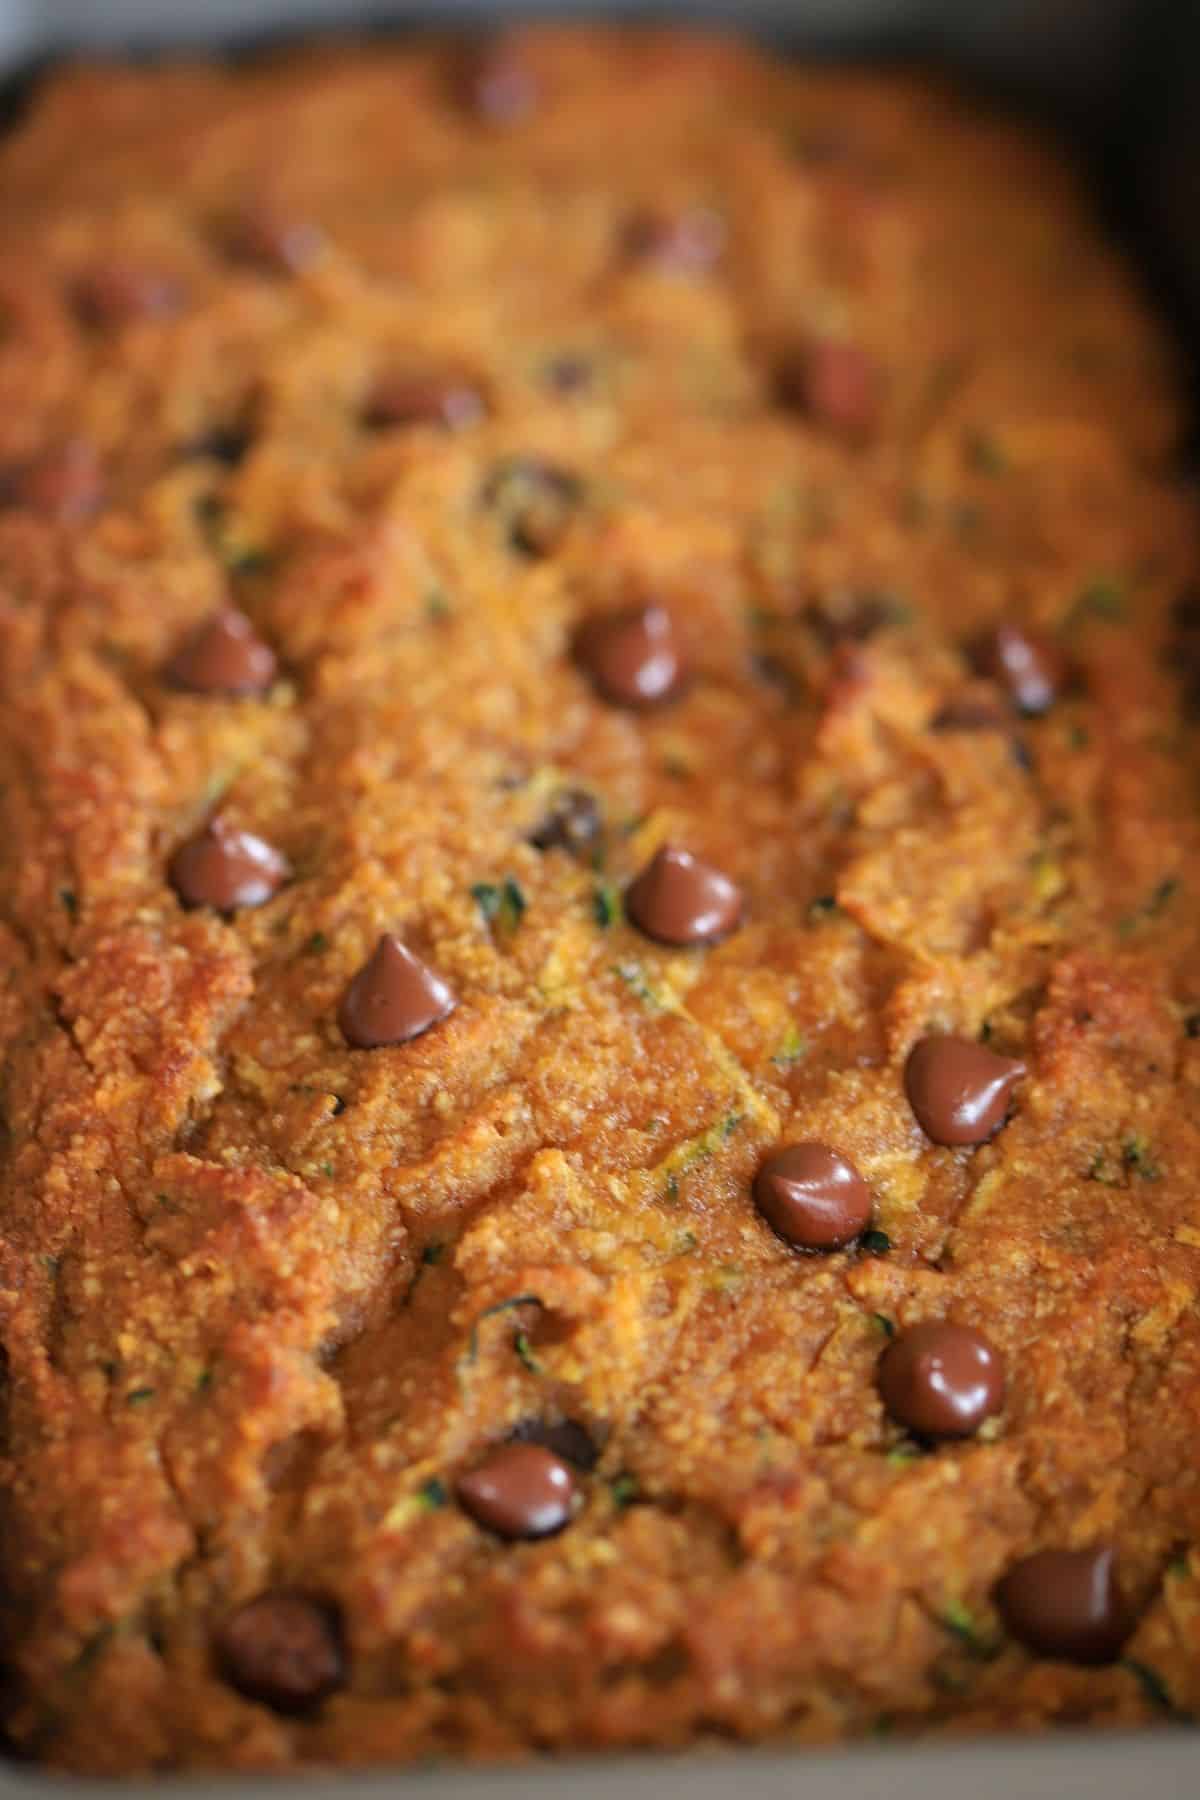 baked pumpkin loaf with chocolate chips on top